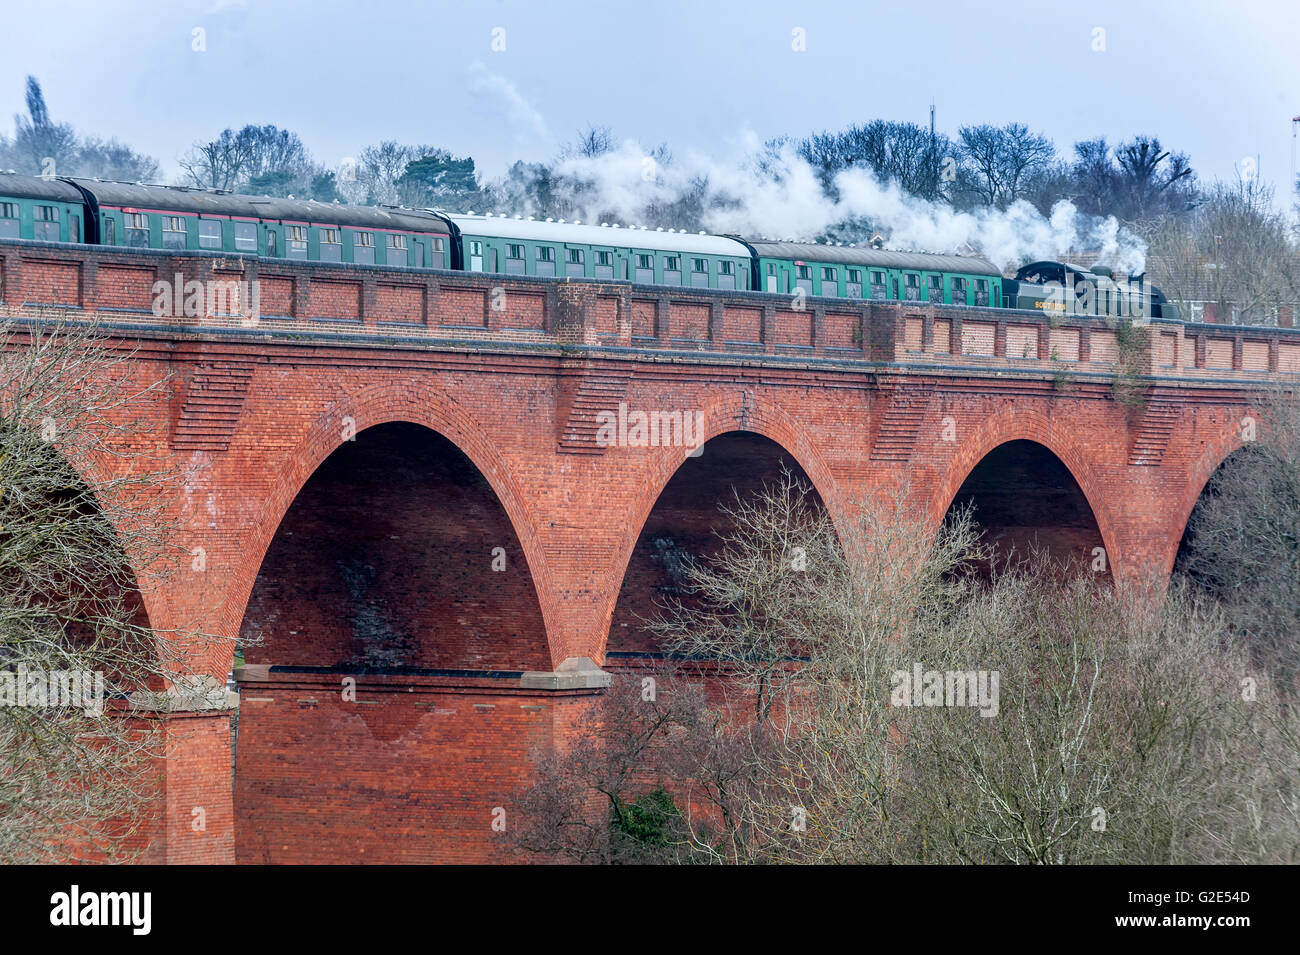 A steam train running on the Imberhorne Viaduct in East Grinstead for the first time since 1958. Stock Photo